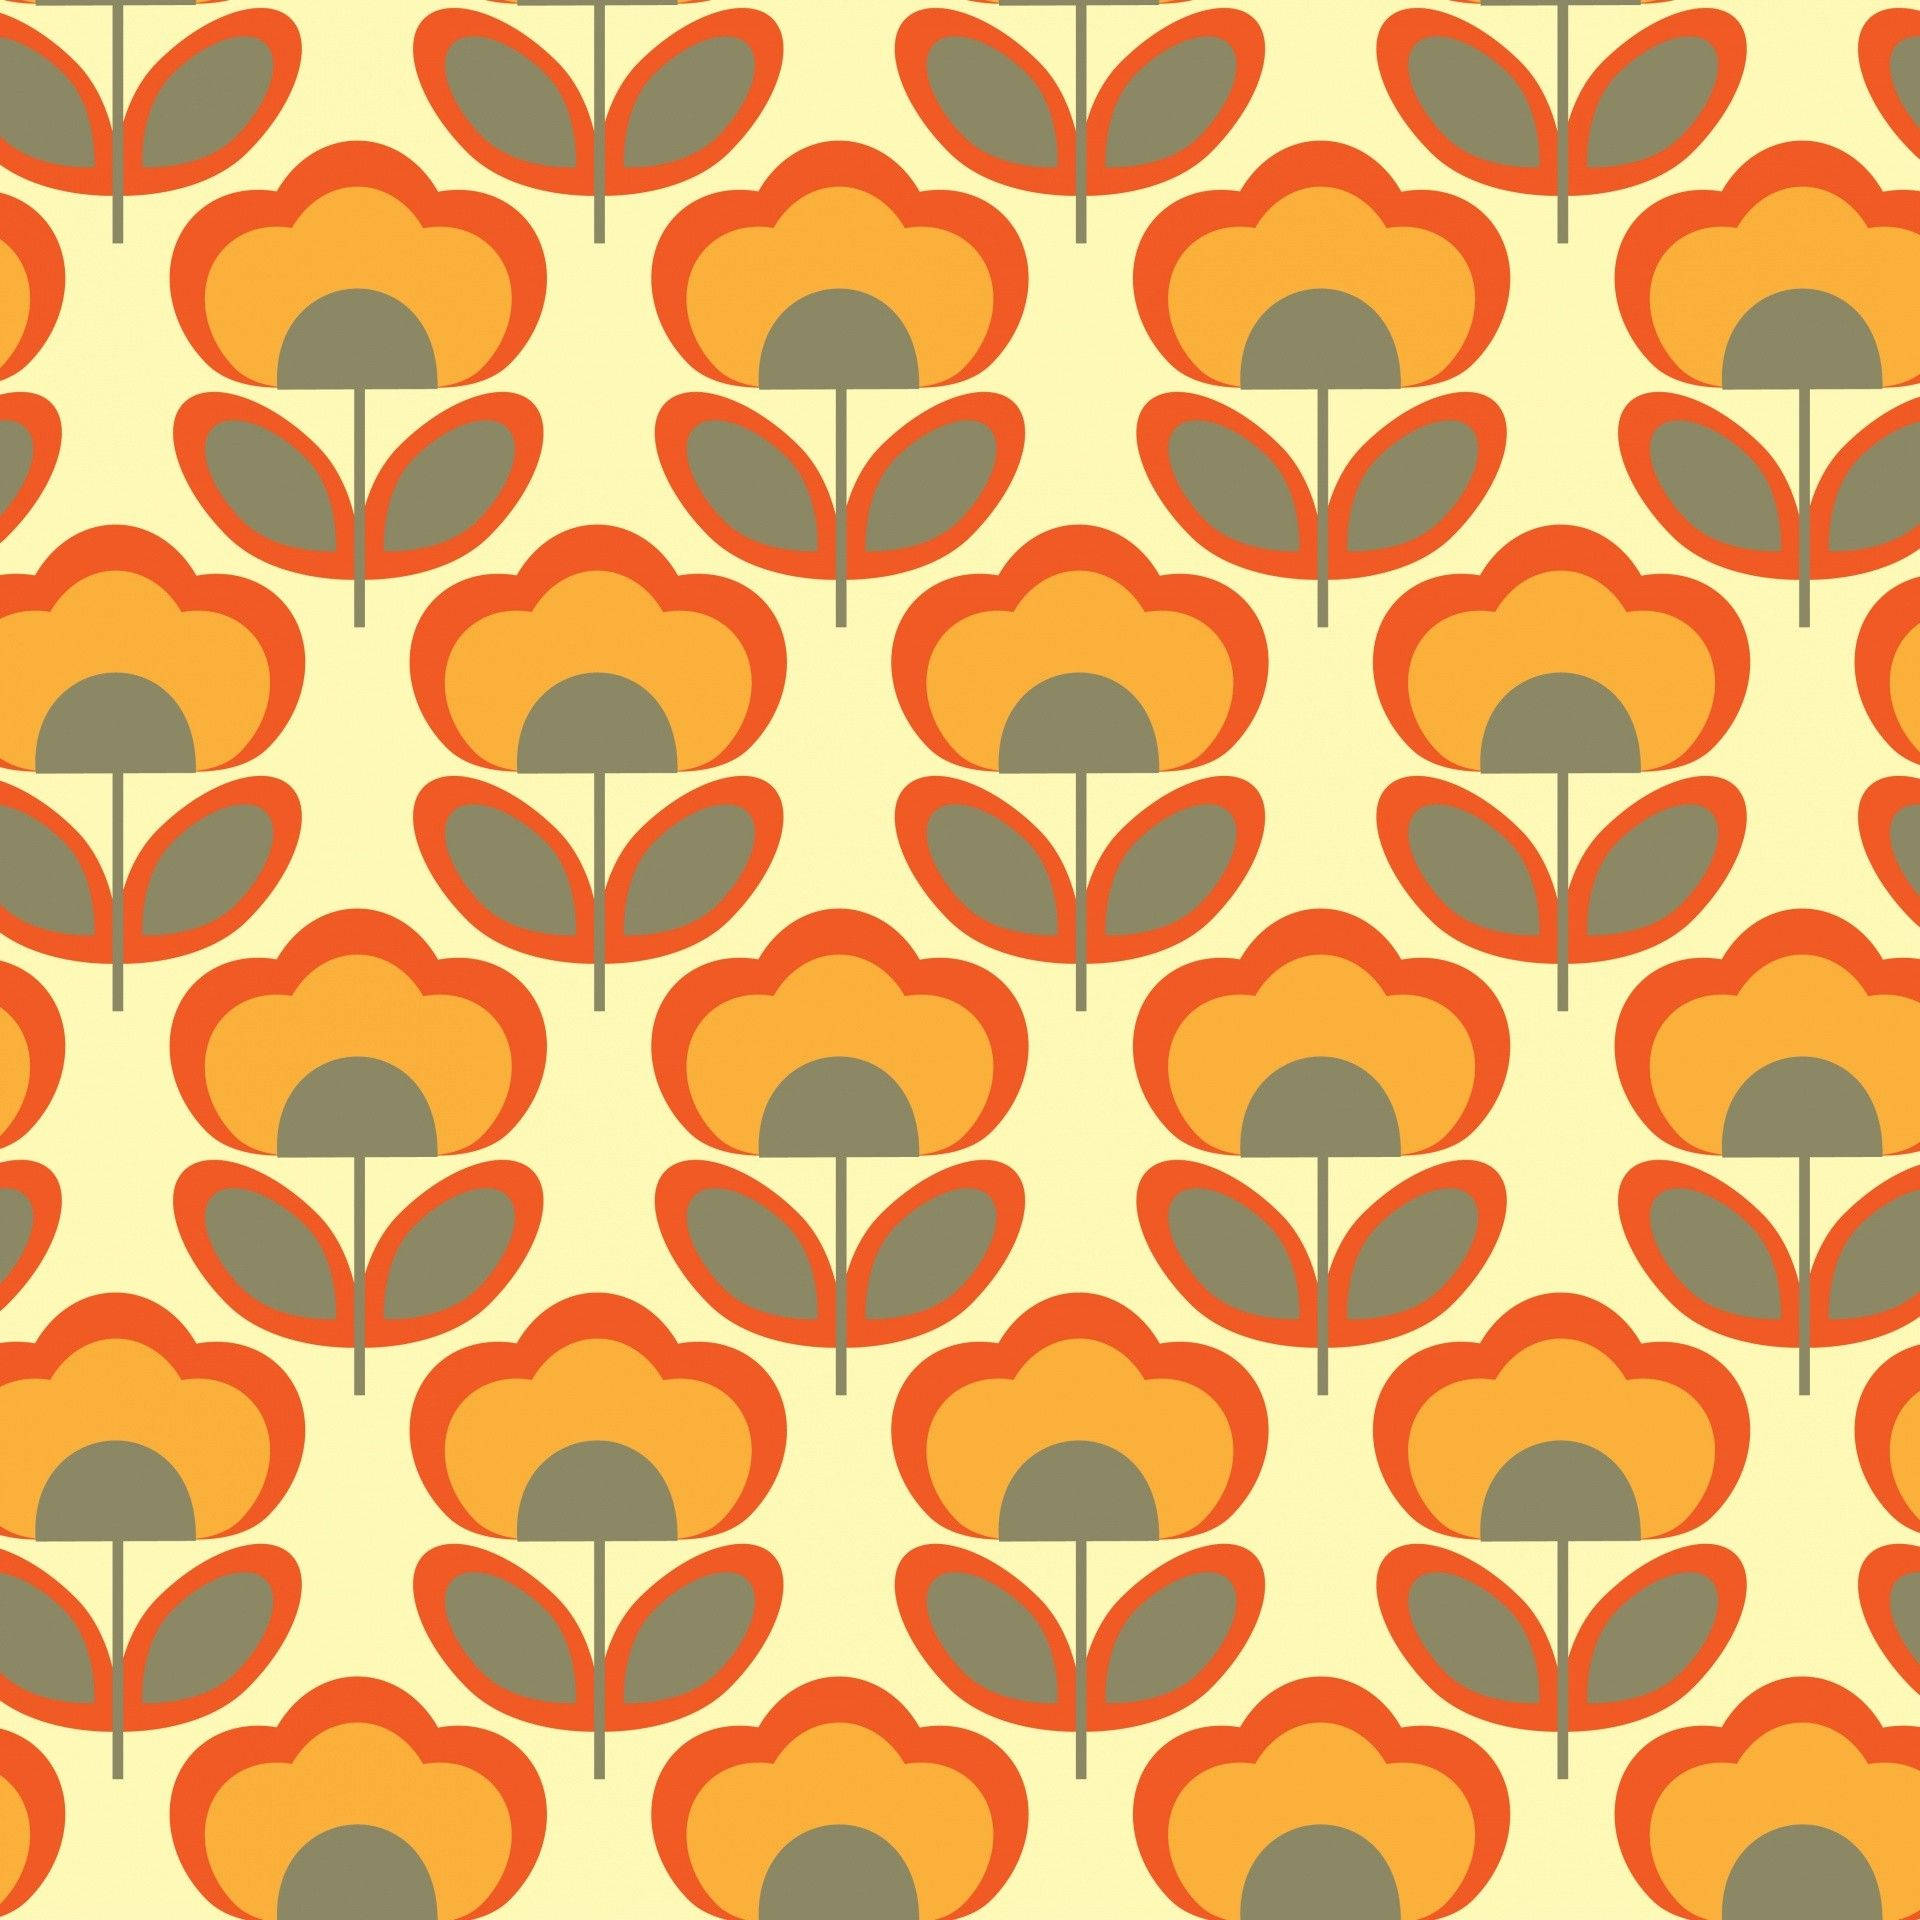 Floral 70s Retro Aesthetic Background